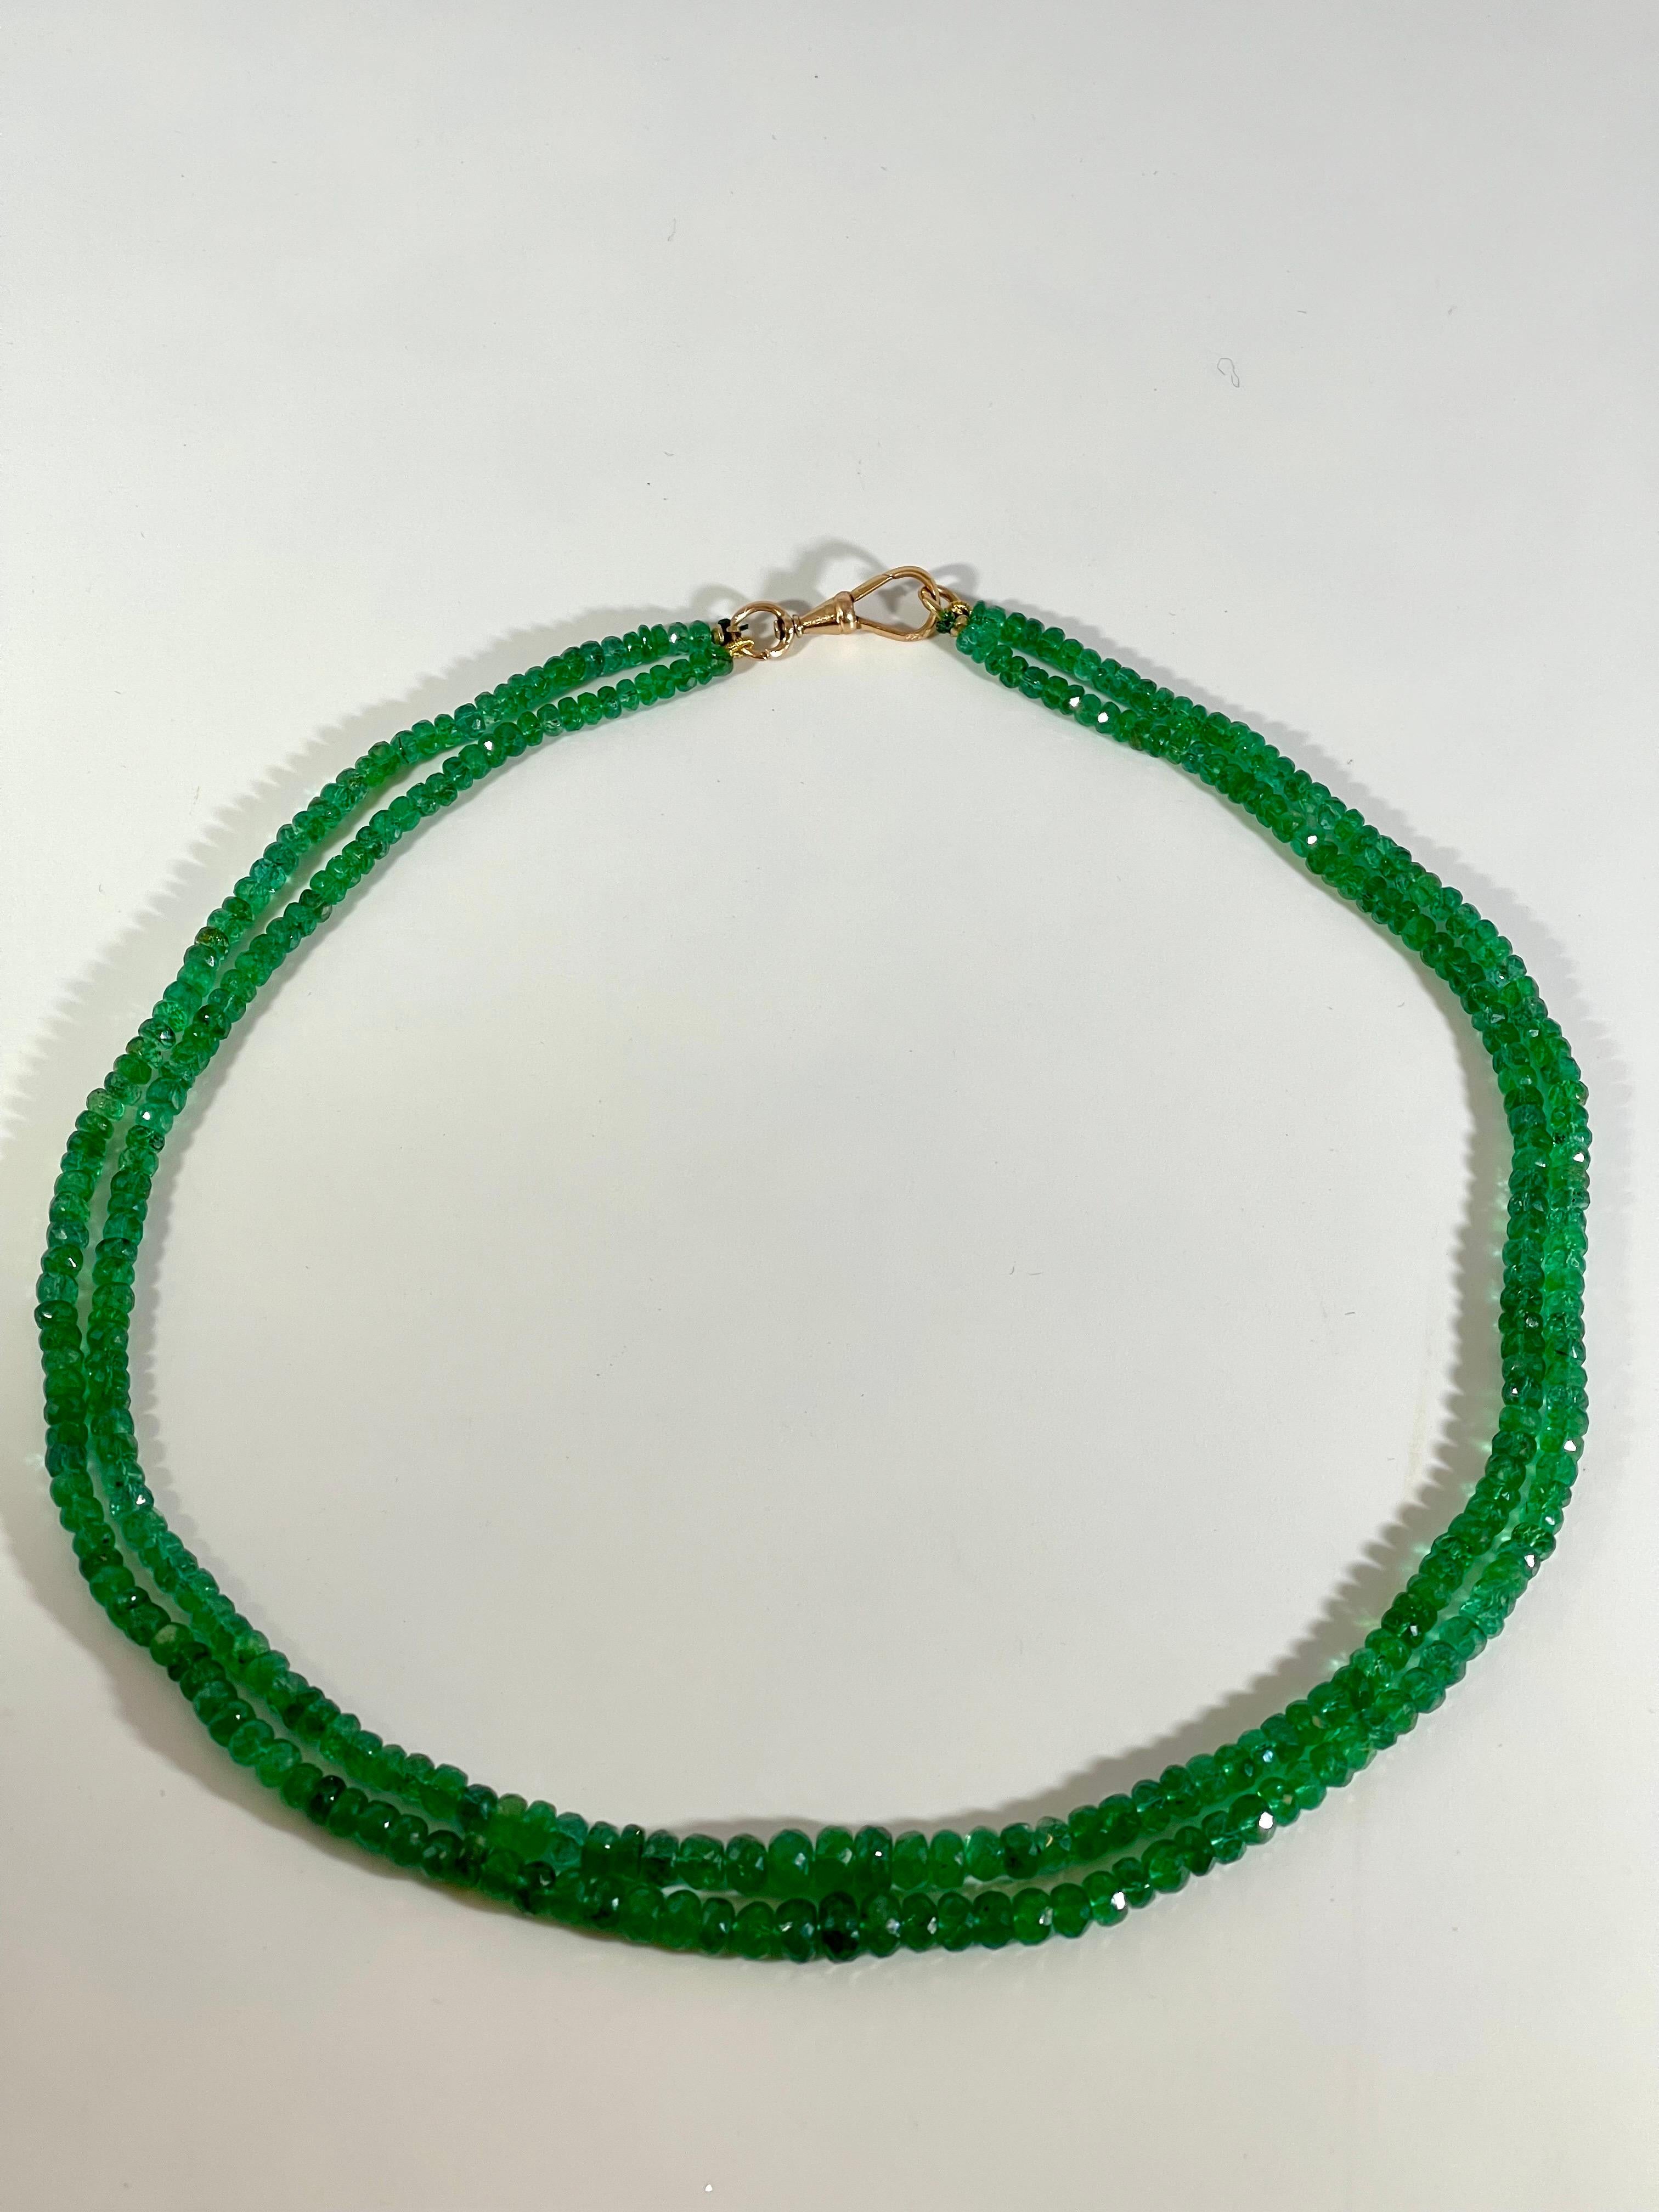 145 Ct Fine Natural Emerald Beads 2 Line Necklace with 14 Kt Yellow Gold Clasp For Sale 4